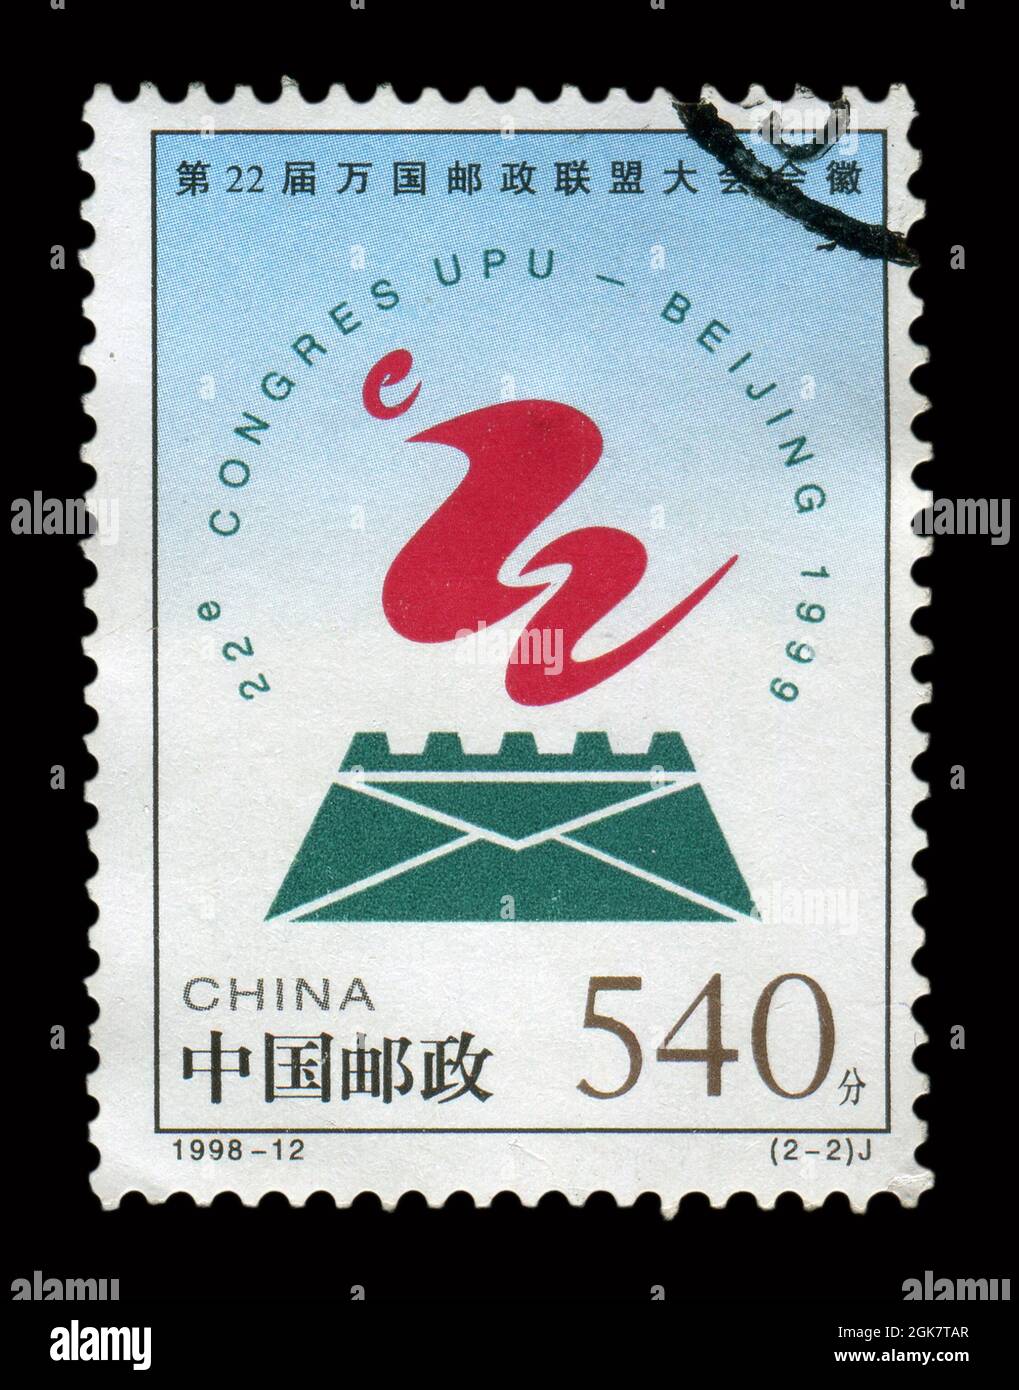 Stamp printed in China shows image of the 22e Congres UPU - Beijing 1999, circa 1999. Stock Photo